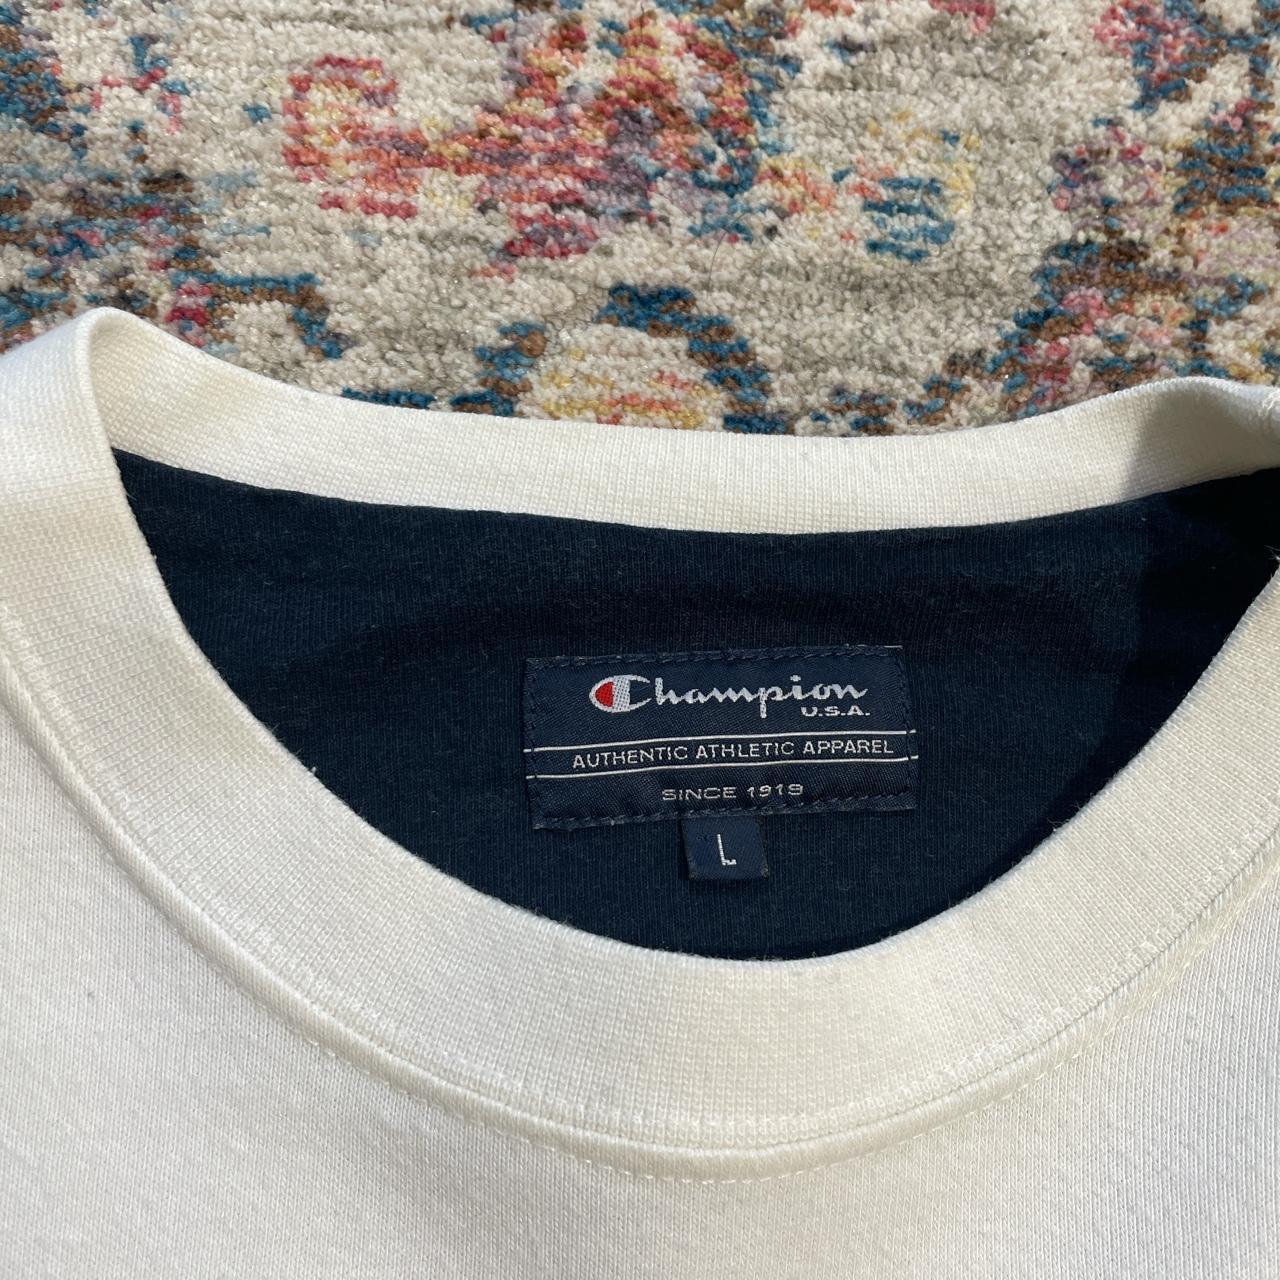 Vintage Champion White Spell Out Sweatshirt